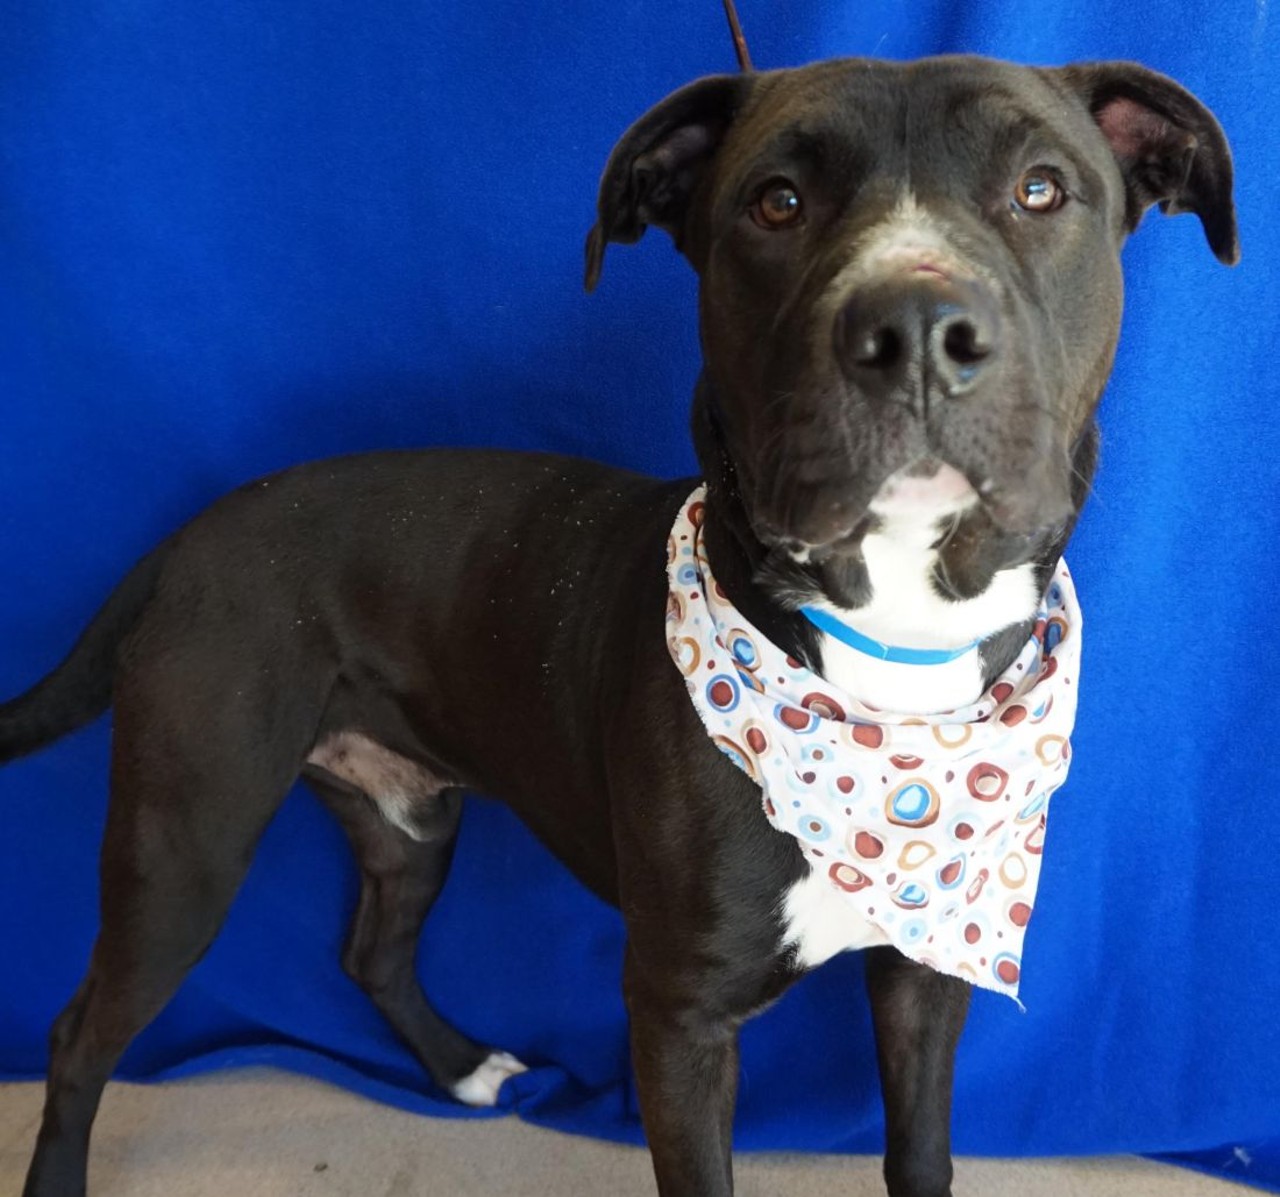 NAME: Cucumber
GENDER: Male
BREED: Labrador Retriever-Pit Bull Terrier mix
AGE: 1 year, 6 months
WEIGHT: 68 pounds
SPECIAL CONSIDERATIONS: None
REASON I CAME TO MHS: Agency transfer
LOCATION: Rochester Hills Center for Animal Care
ID NUMBER: 865108